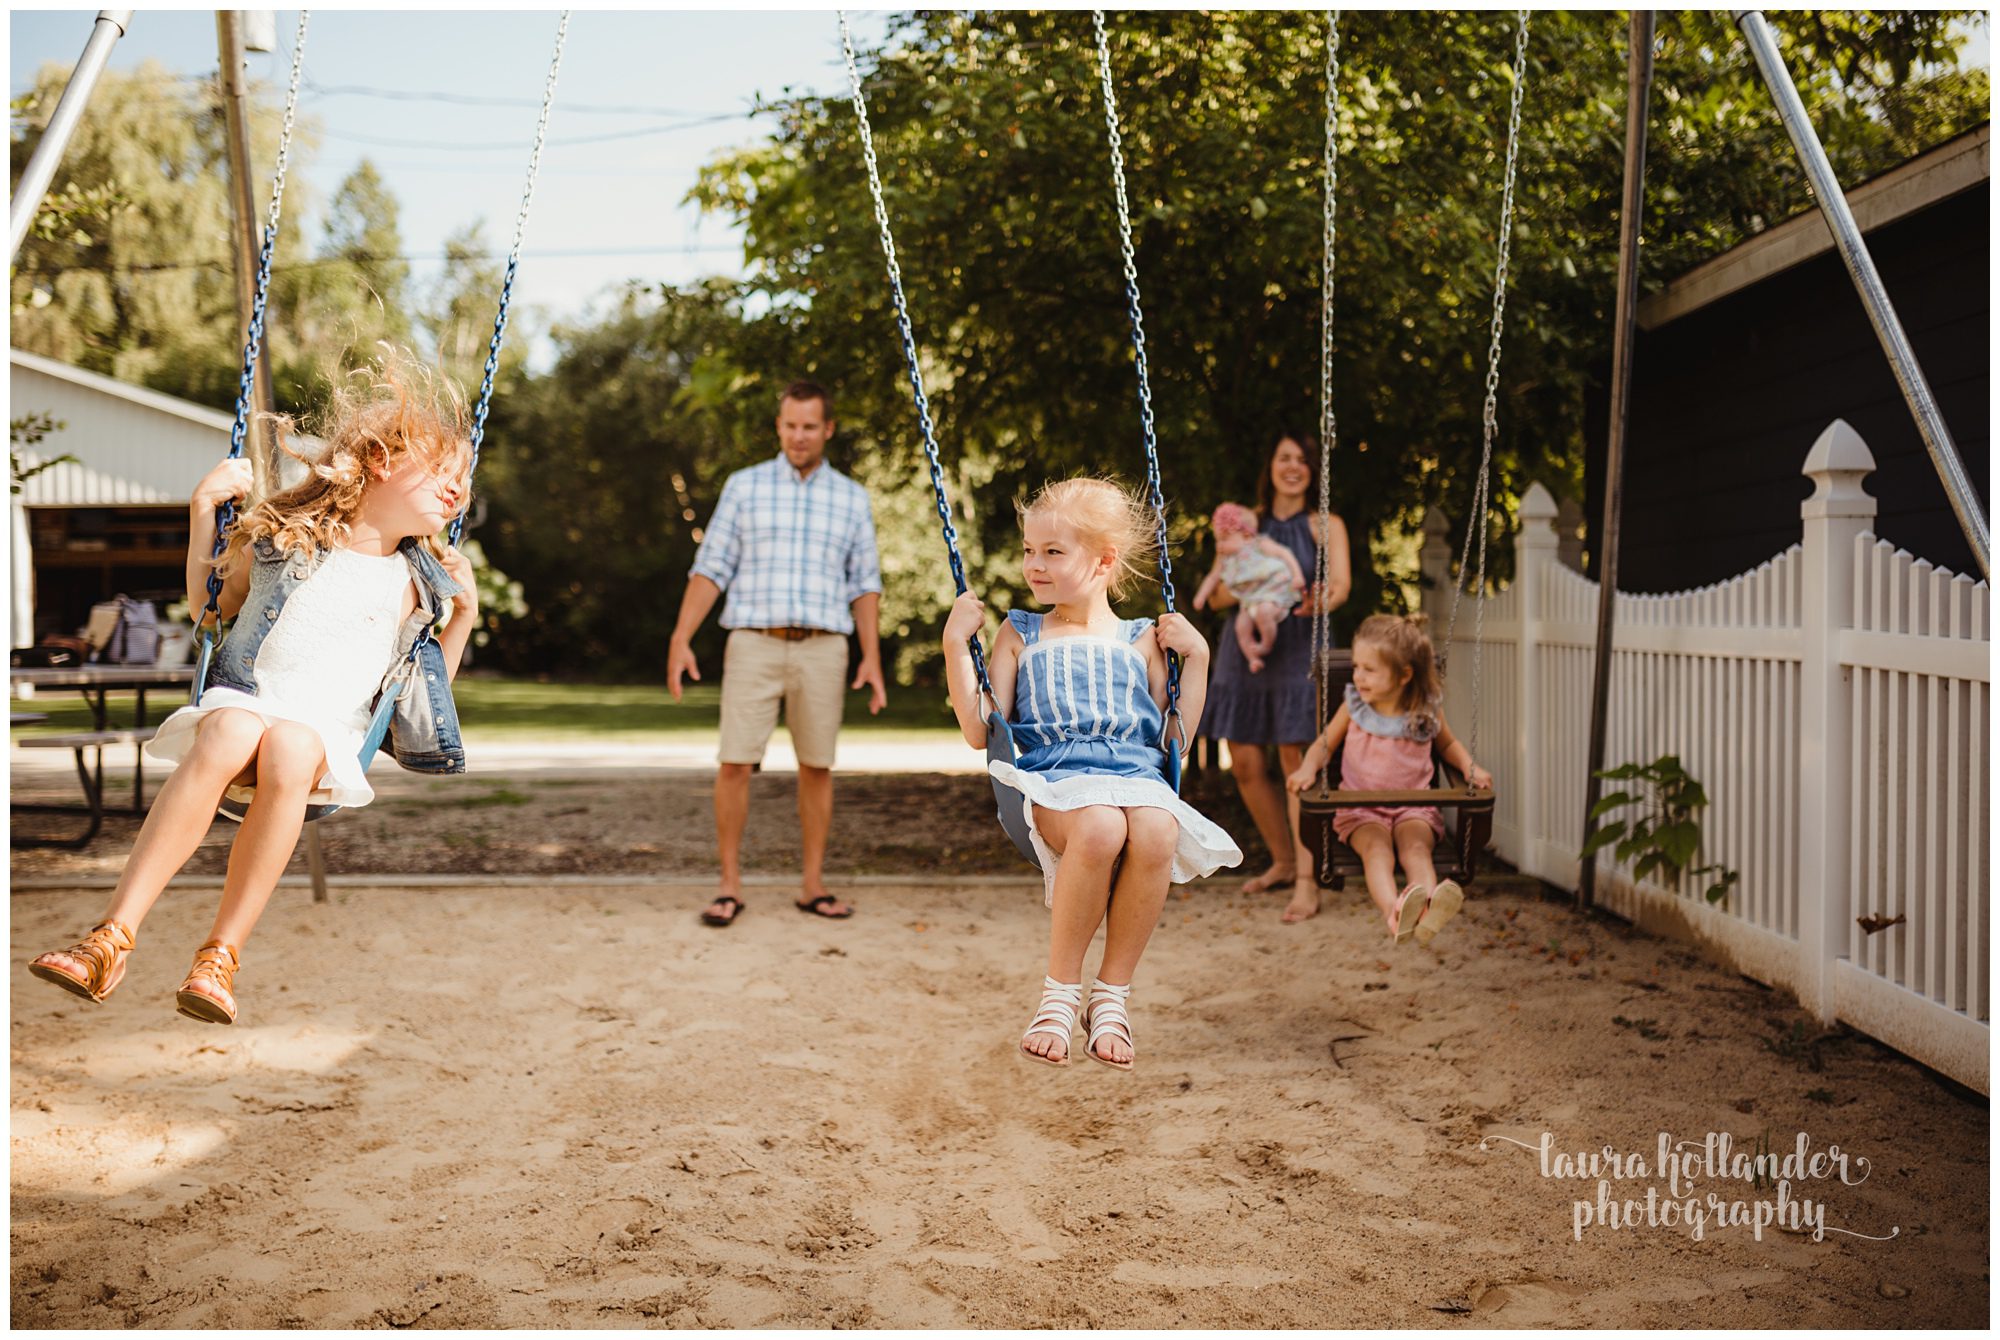 family of 6, four daughters, family portraits on the swing set, Laura Hollander Photography Battle Creek MI